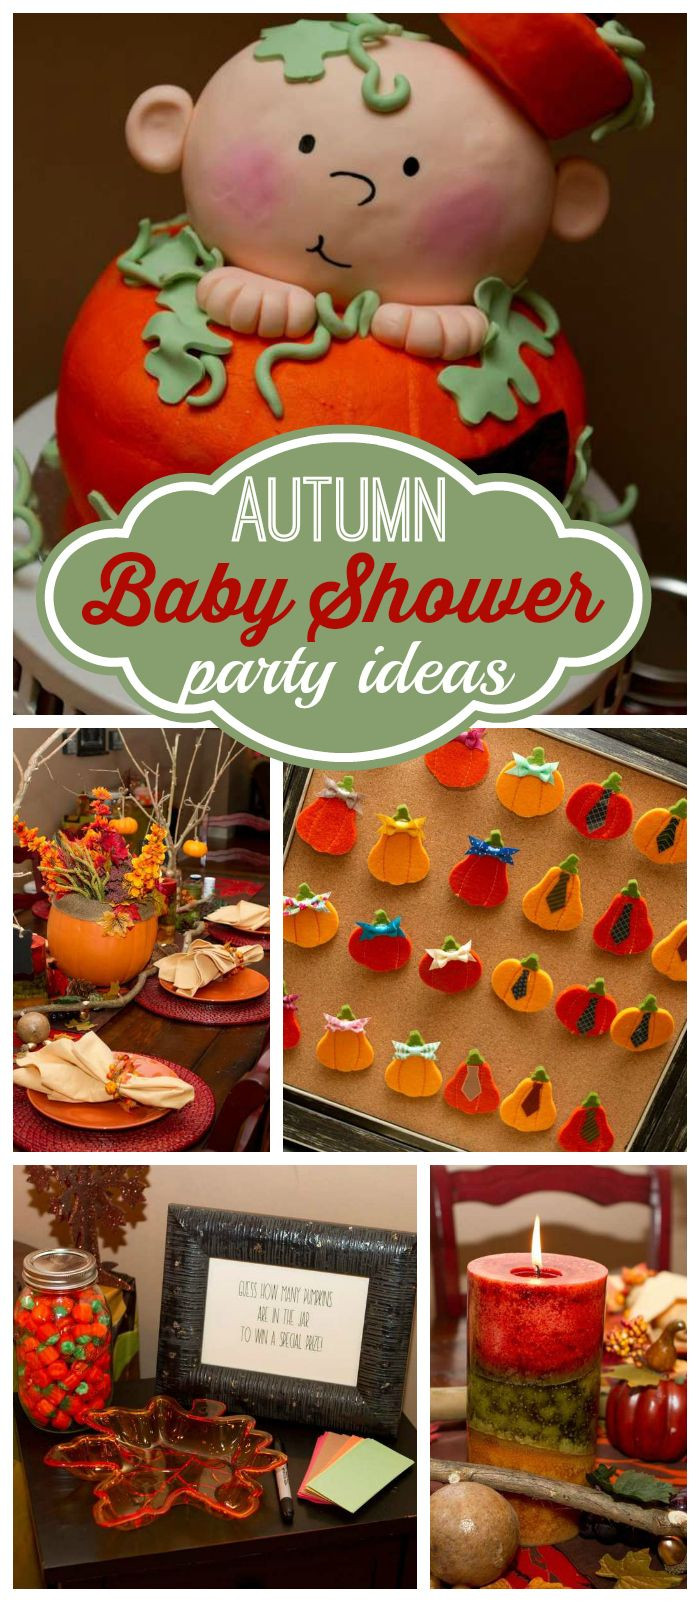 Halloween Gender Reveal Party Ideas
 An "our lil pumpkin" gender reveal baby shower party with